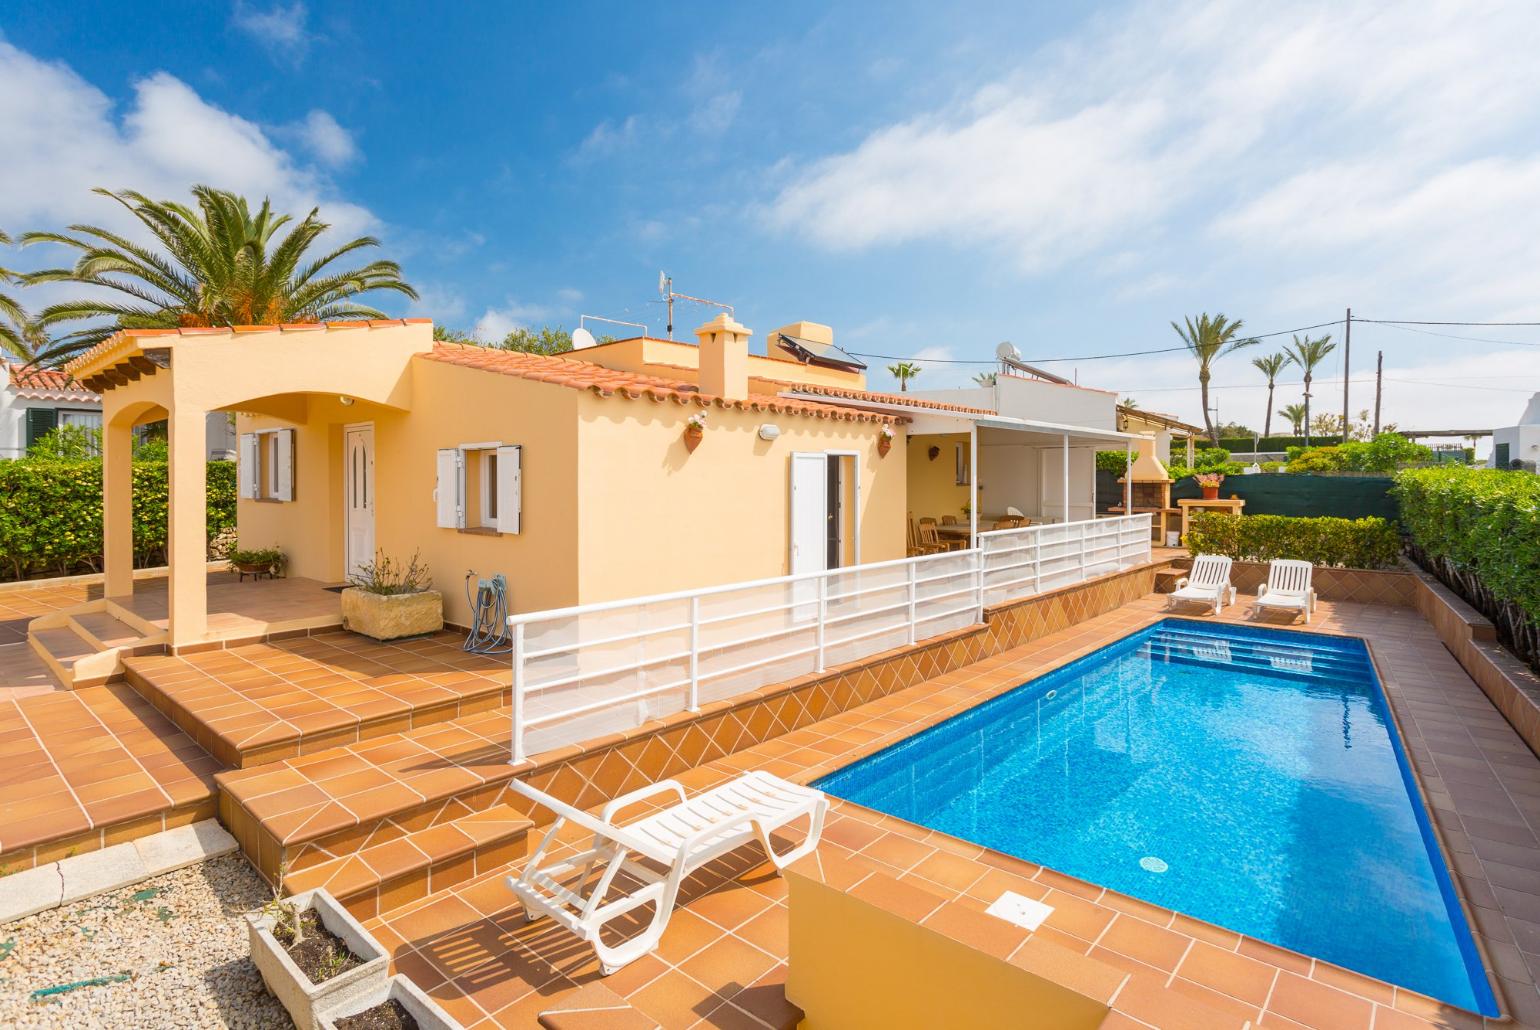 ,Beautiful villa with private pool and terrace area